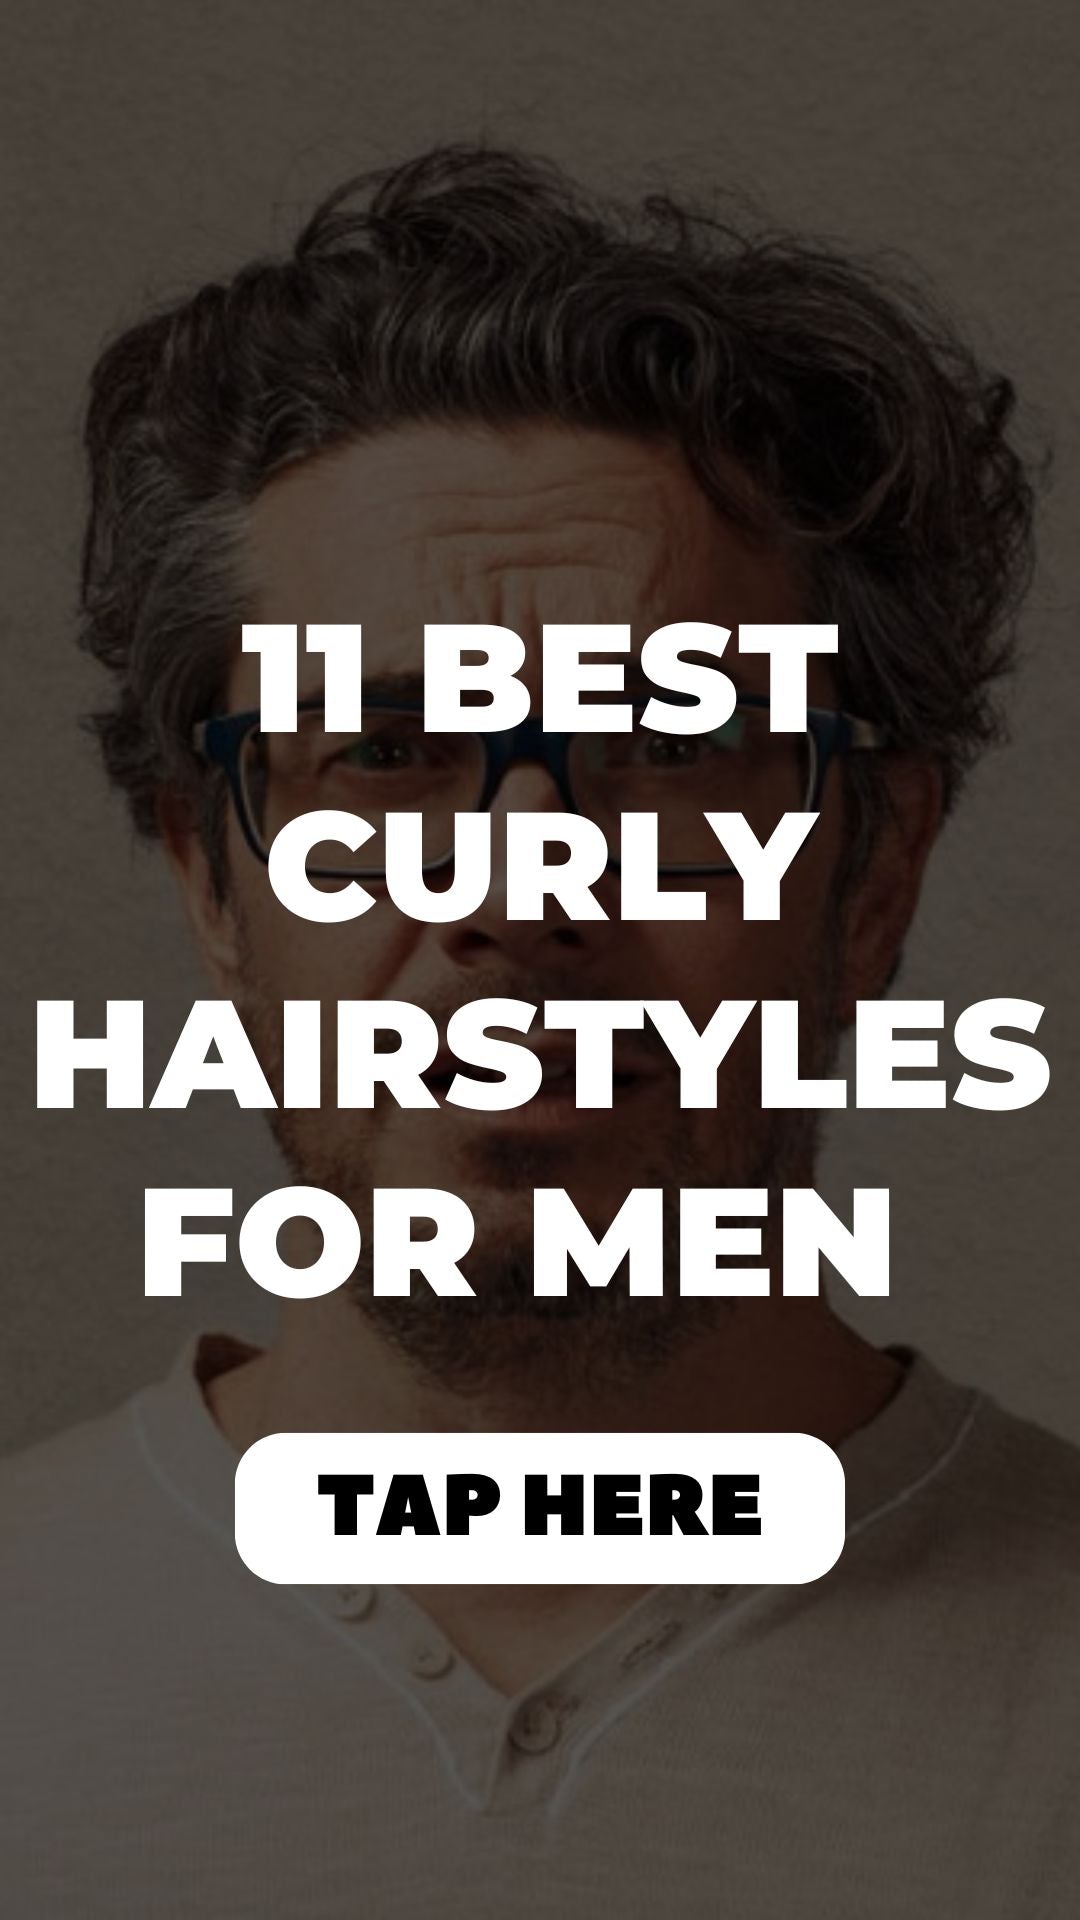 Best Curly Hairstyles